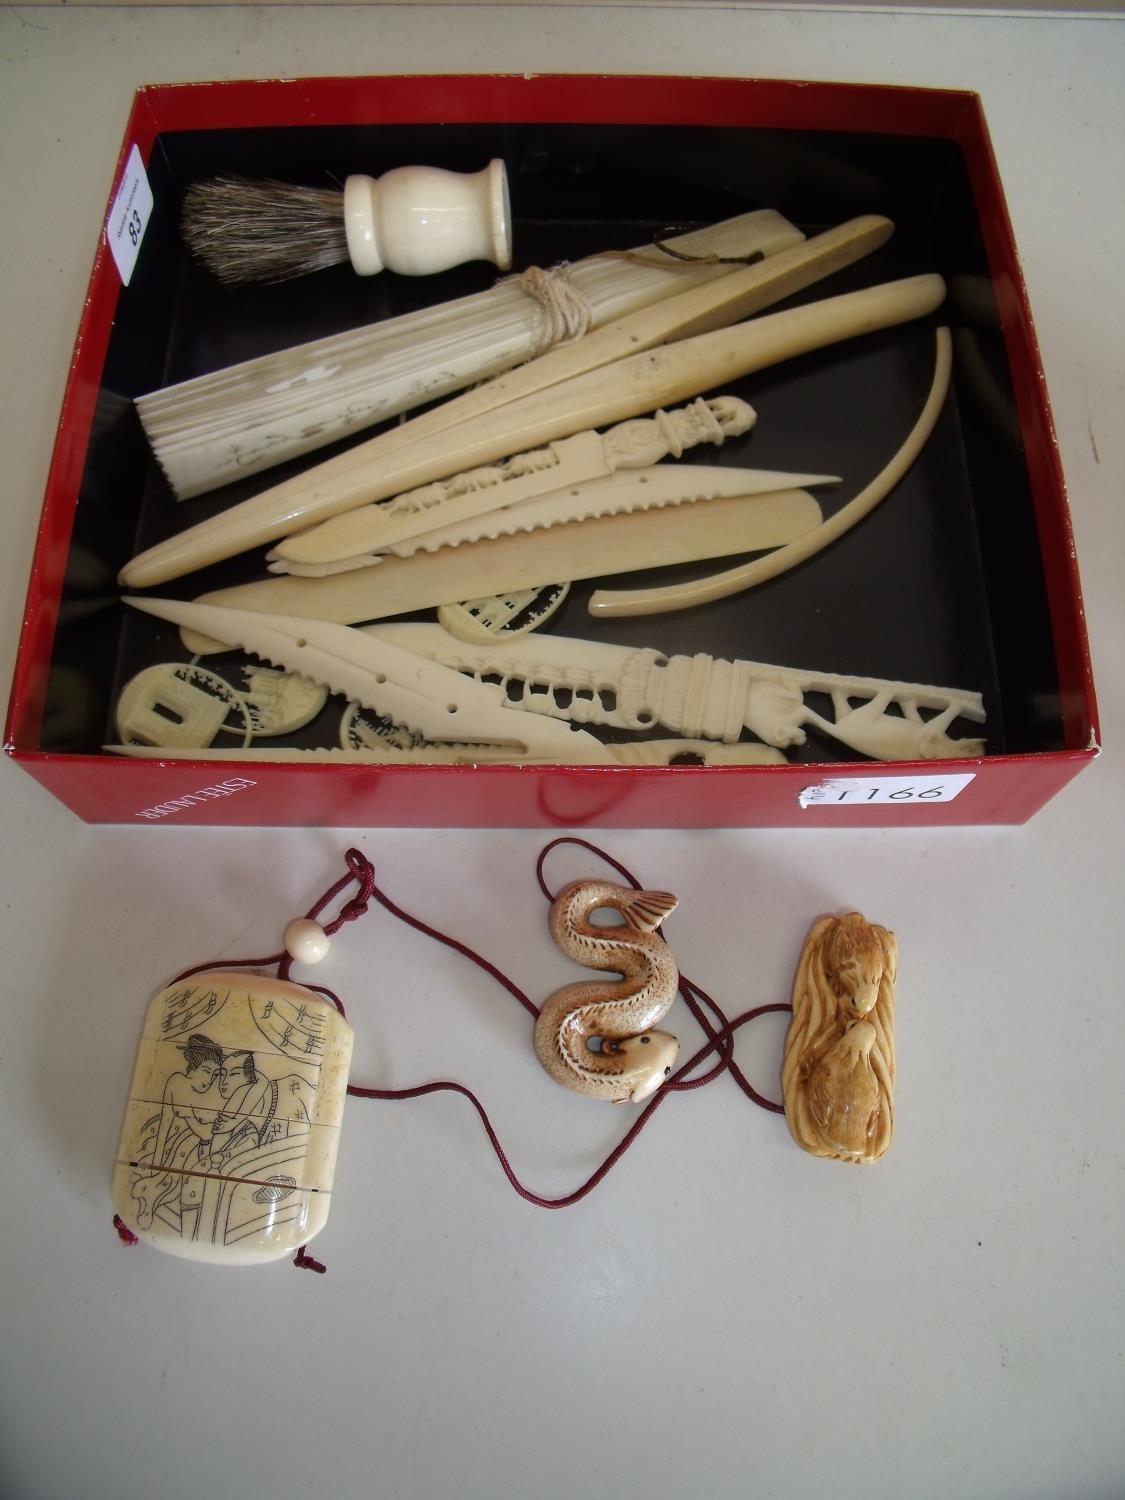 Pair of late Victorian large ivory glove stretchers, folding fan, various paper knives, shaving